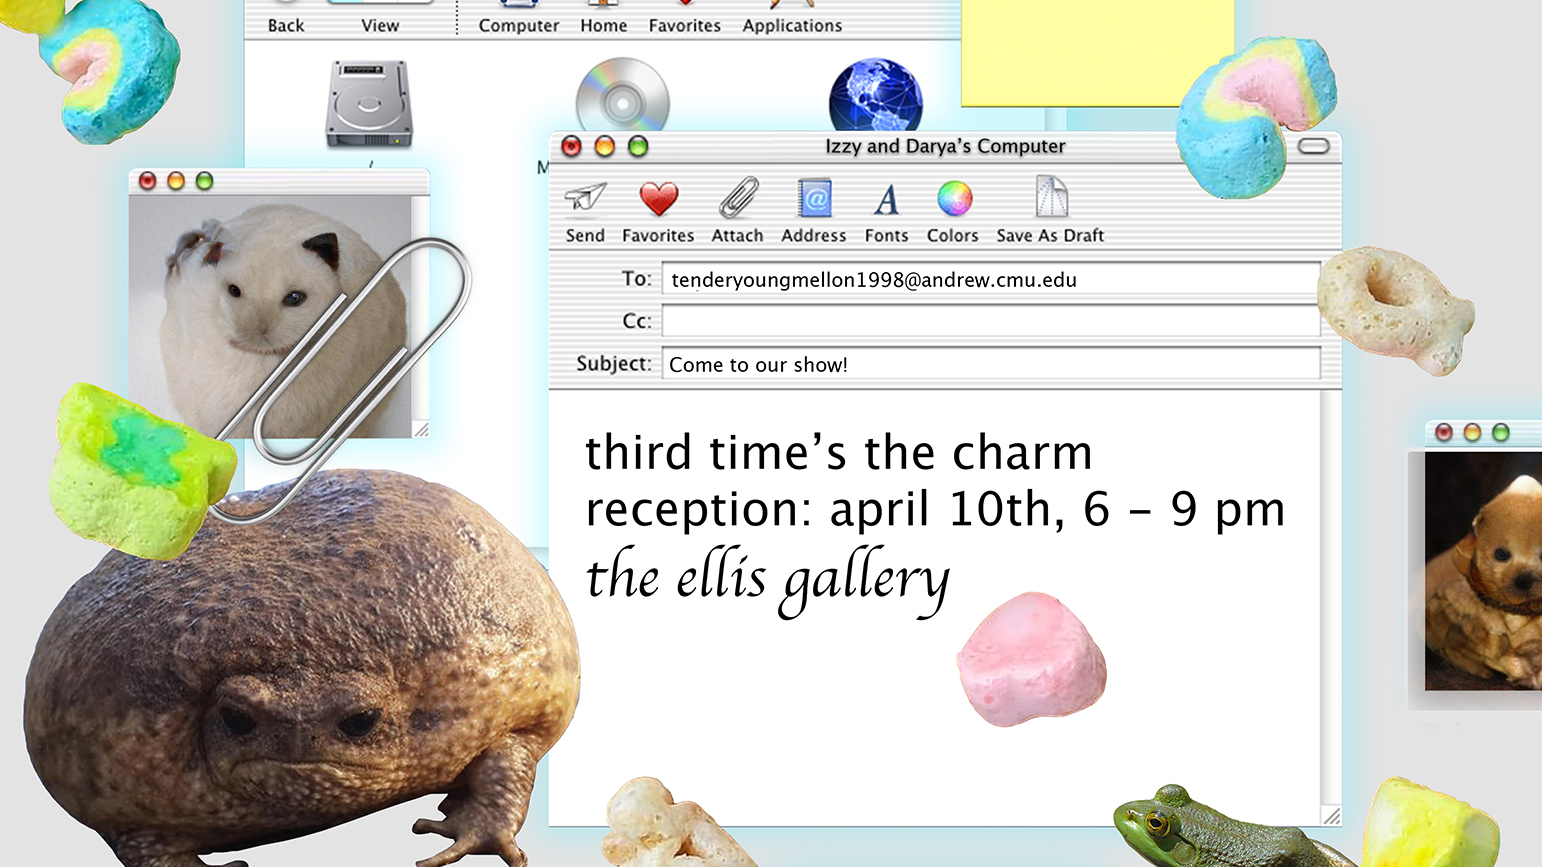 Image of a computer desktop with open email and assorted animal photos